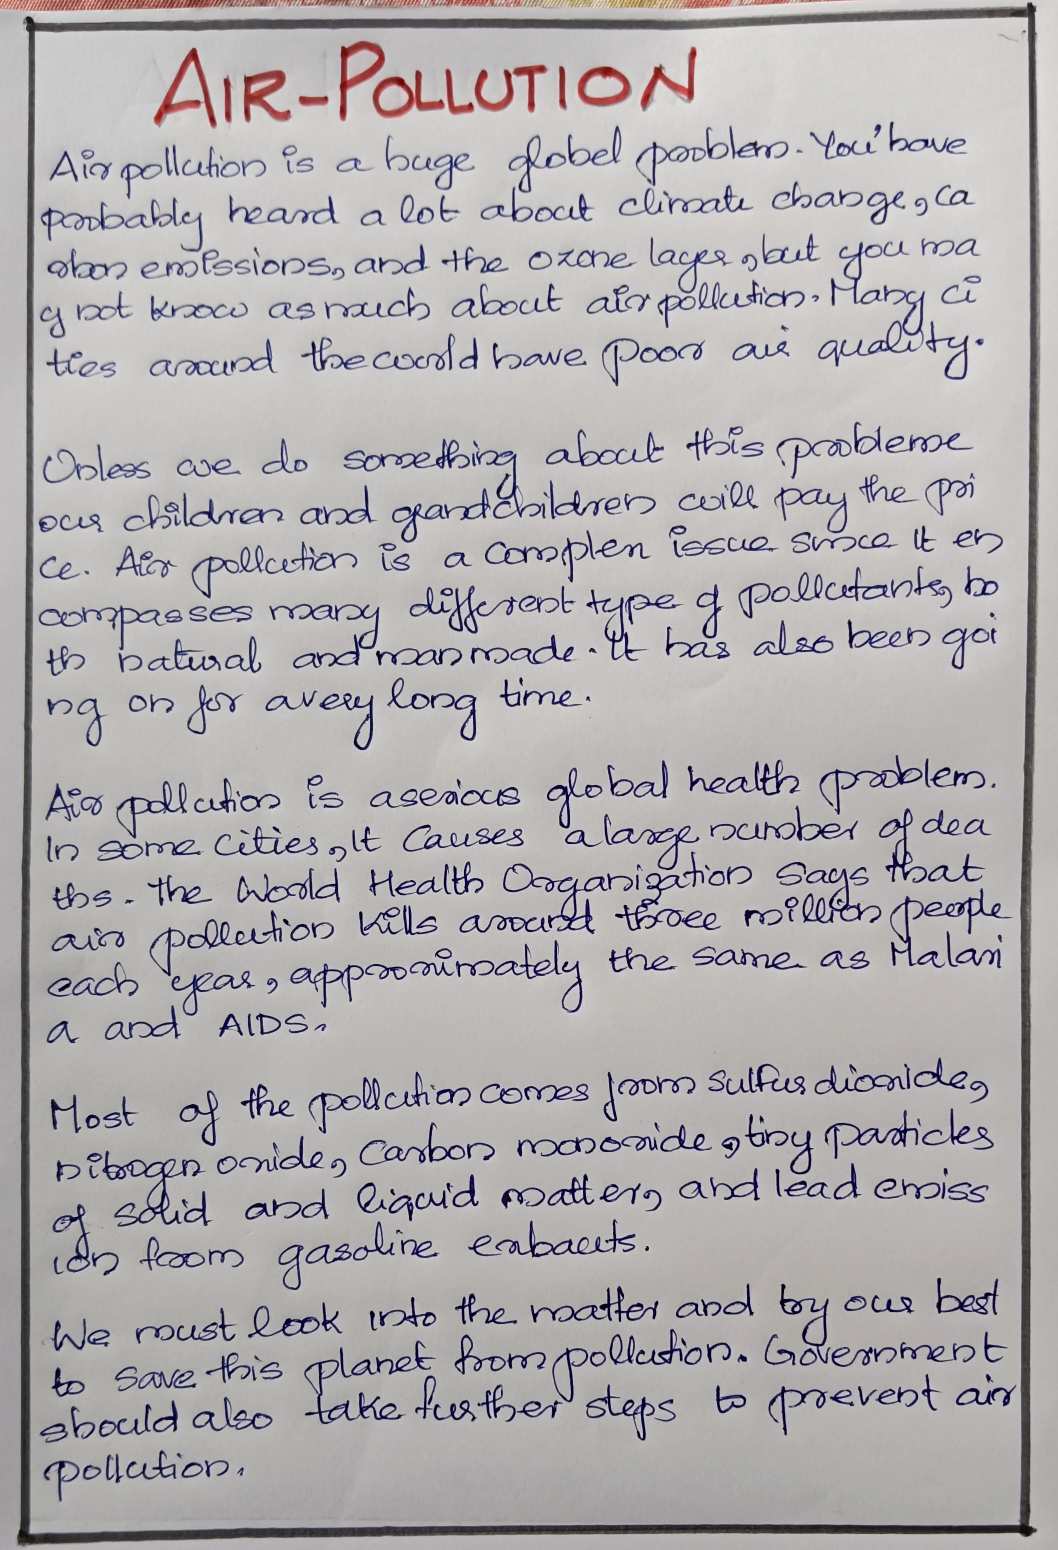 essay on environment pollution causes